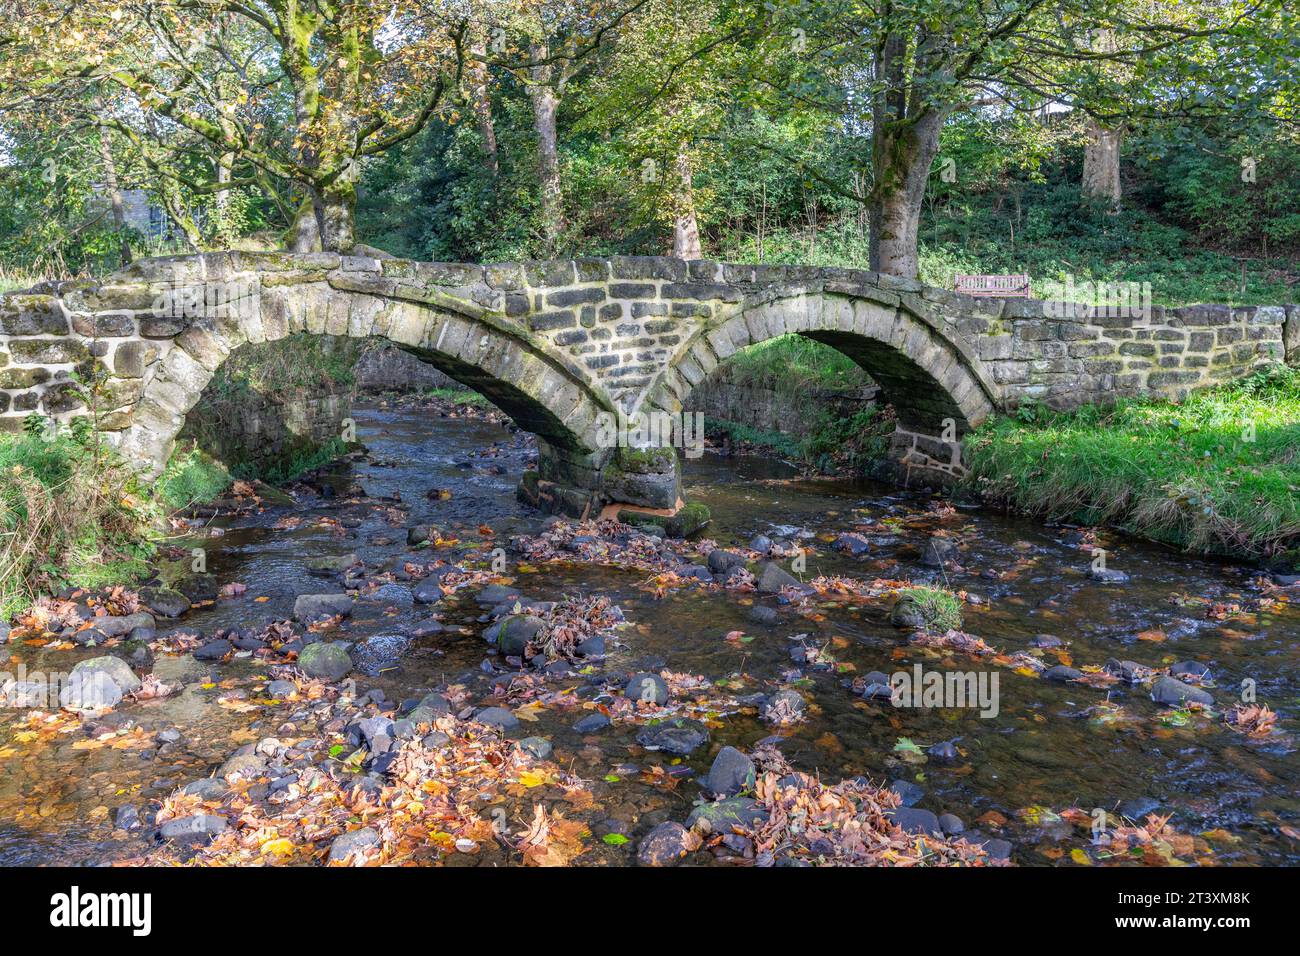 The famous pack-horse bridge is a two-arched structure spanning Wycoller beck. It is sometimes called Sally’s Bridge after one of the Cunliffe family Stock Photo